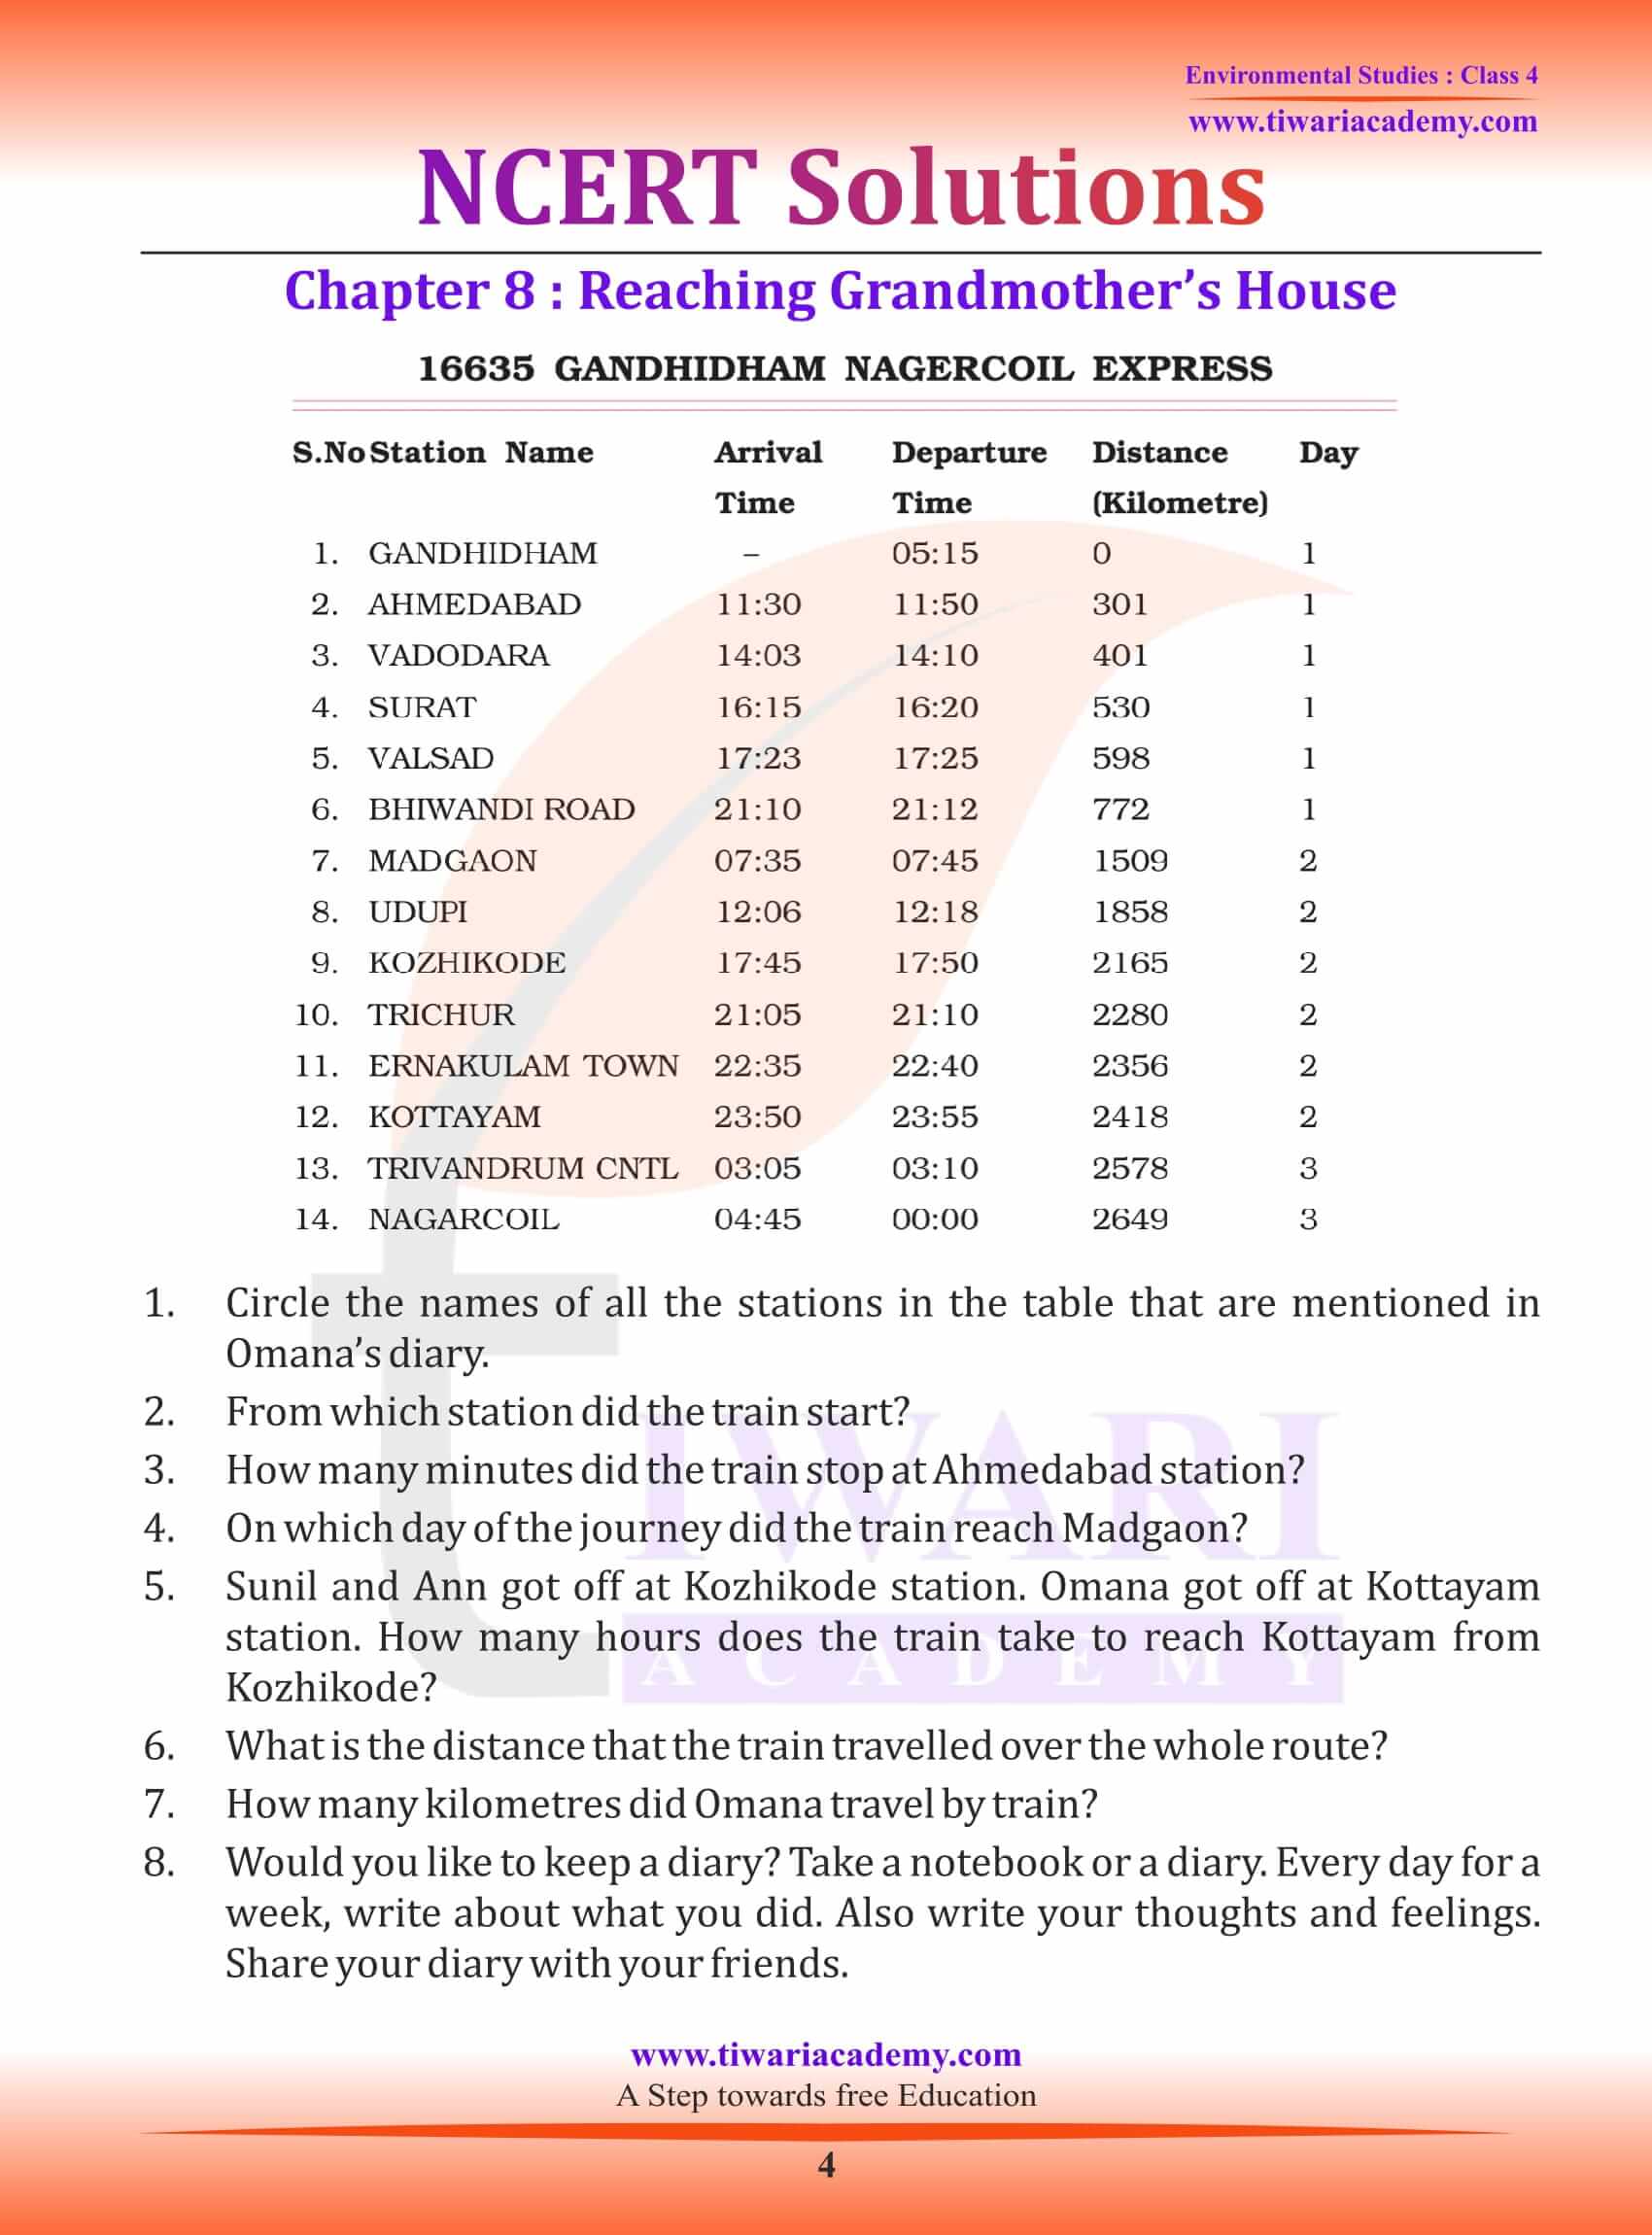 NCERT Solutions for Class 4 EVS Chapter 8 in English Medium